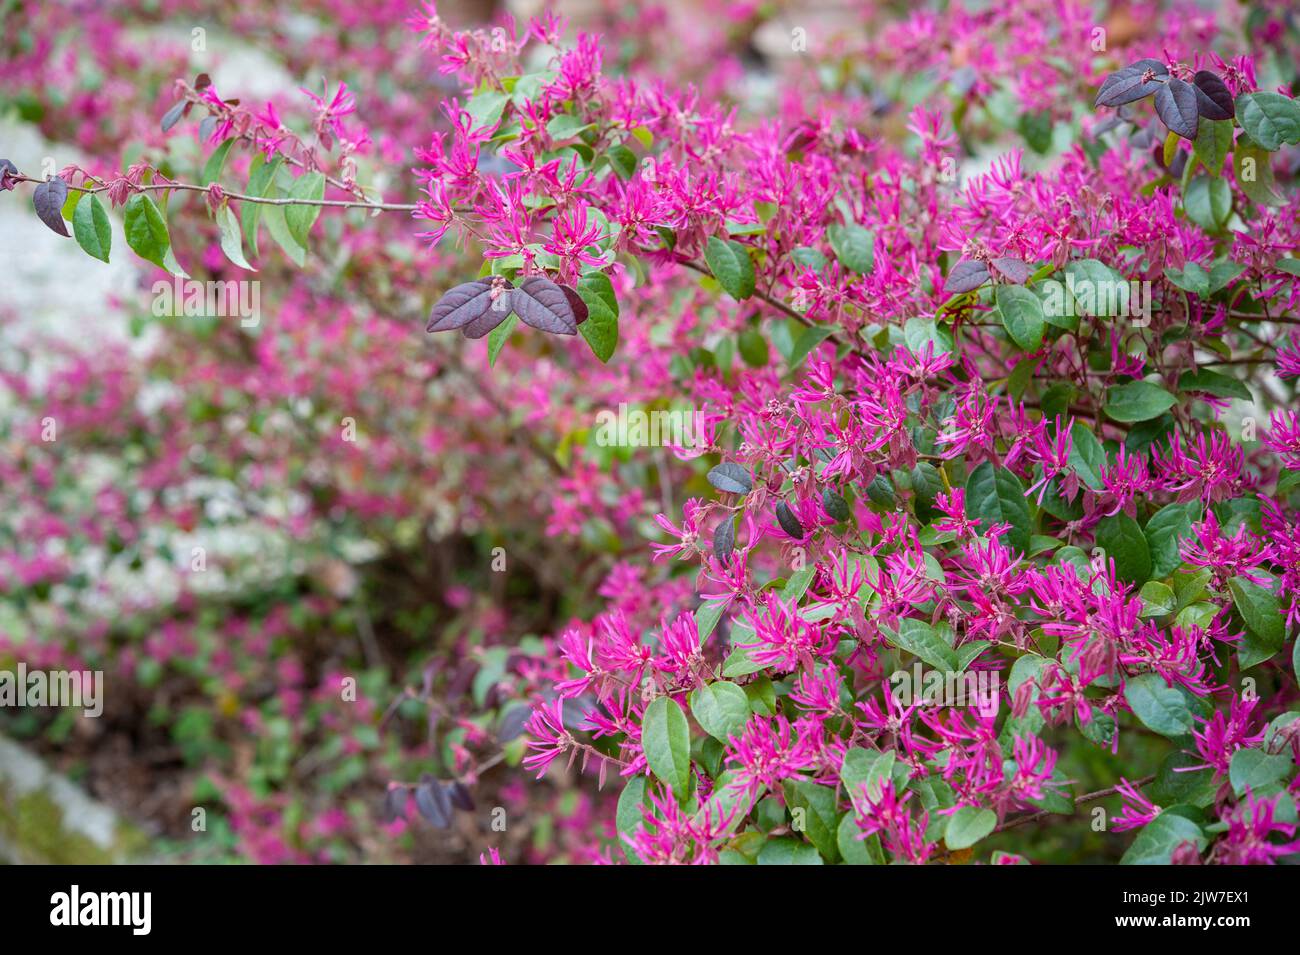 Loropetalum chinense is commonly known as Chinese fringe flower and strap flower. Stock Photo